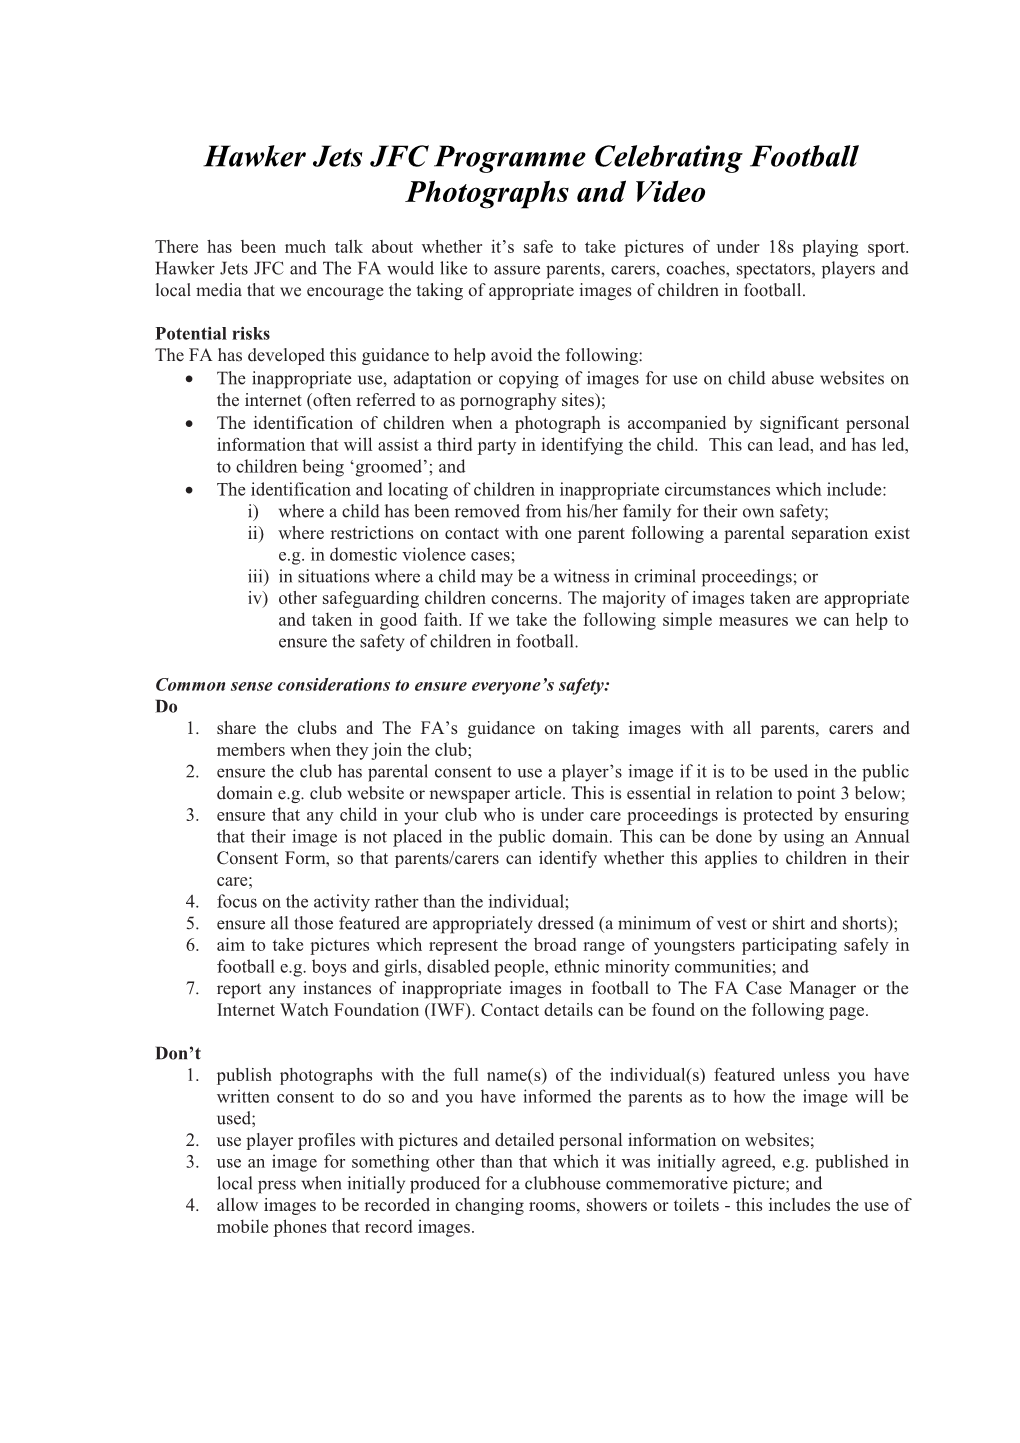 The FA Charter Standard Club Programme Constitution and Club Rules